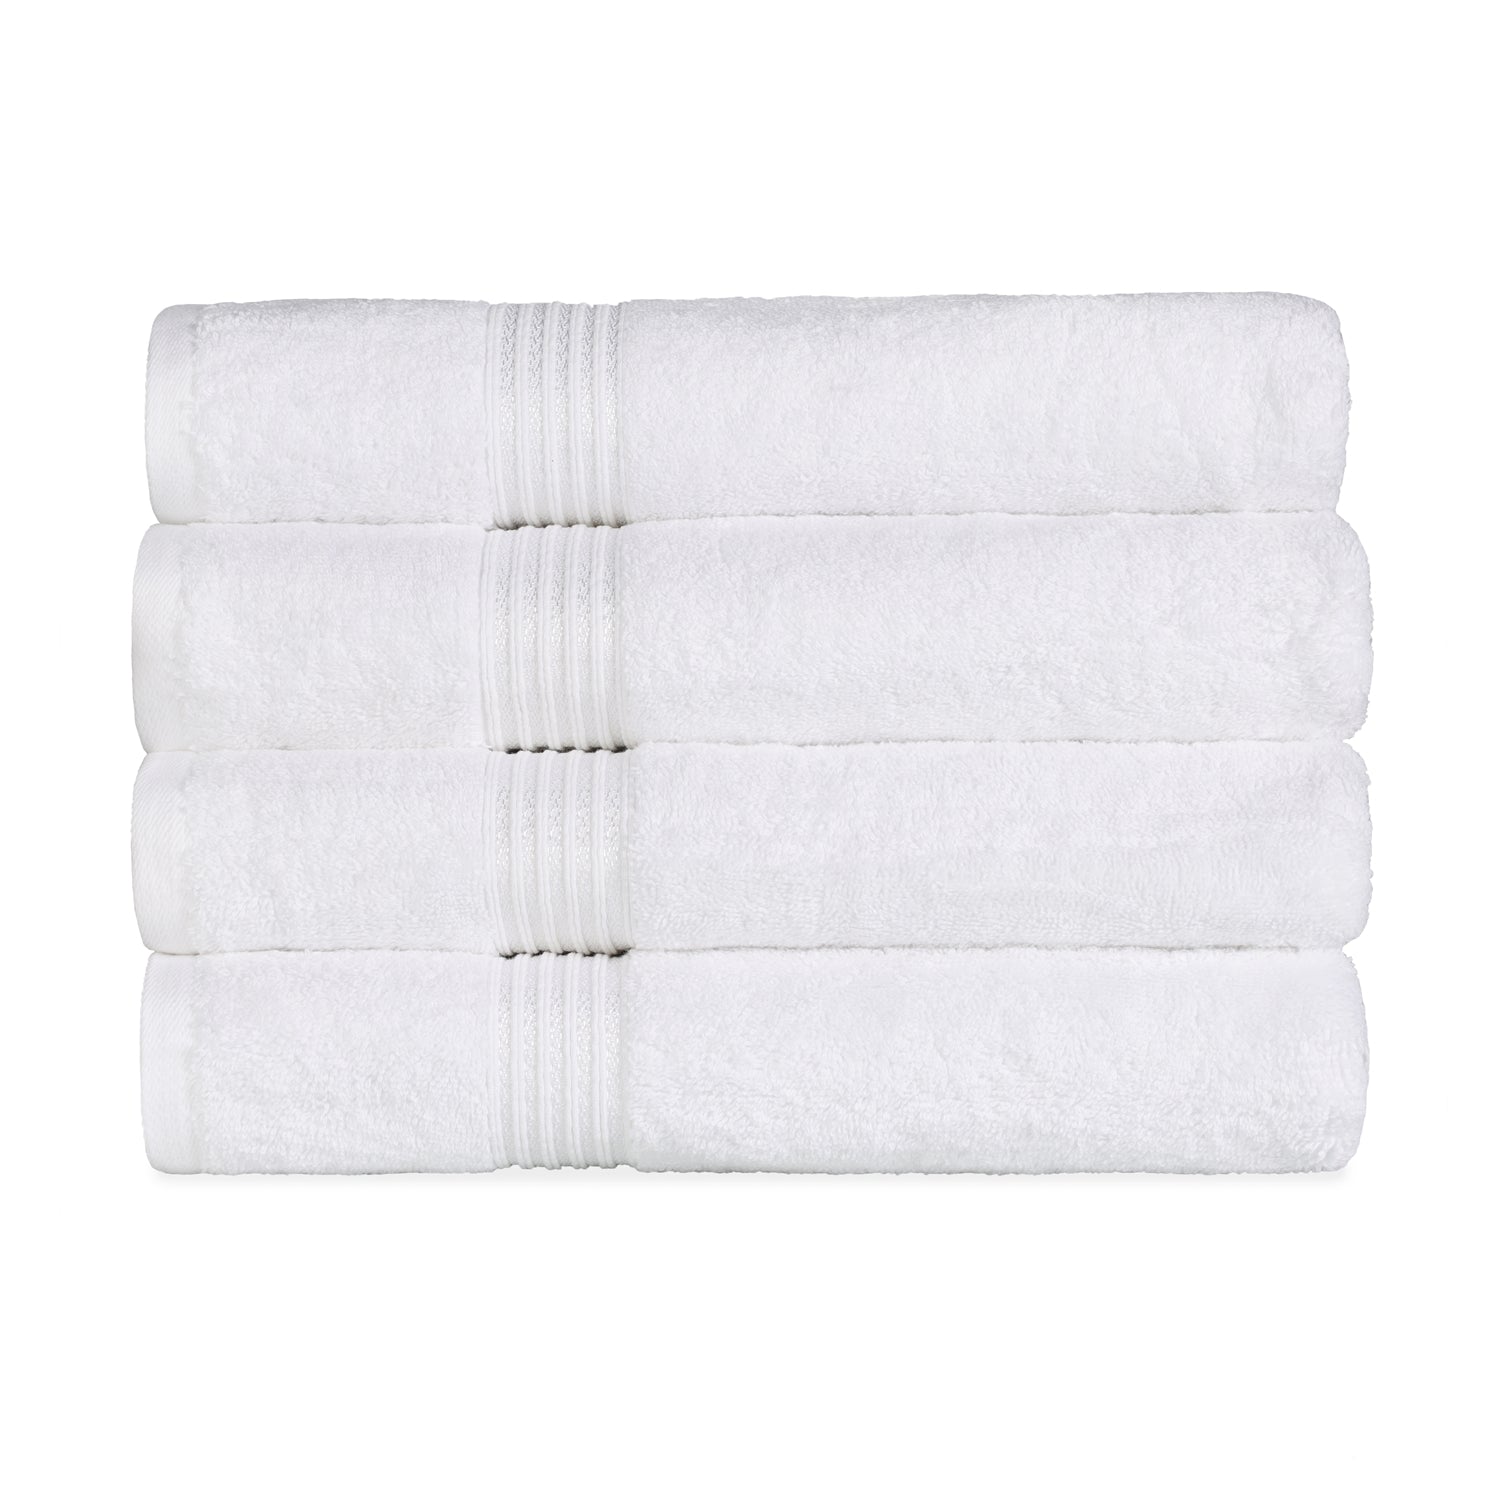 Egyptian Cotton Highly Absorbent Solid 4-Piece Ultra Soft Bath Towel Set - White